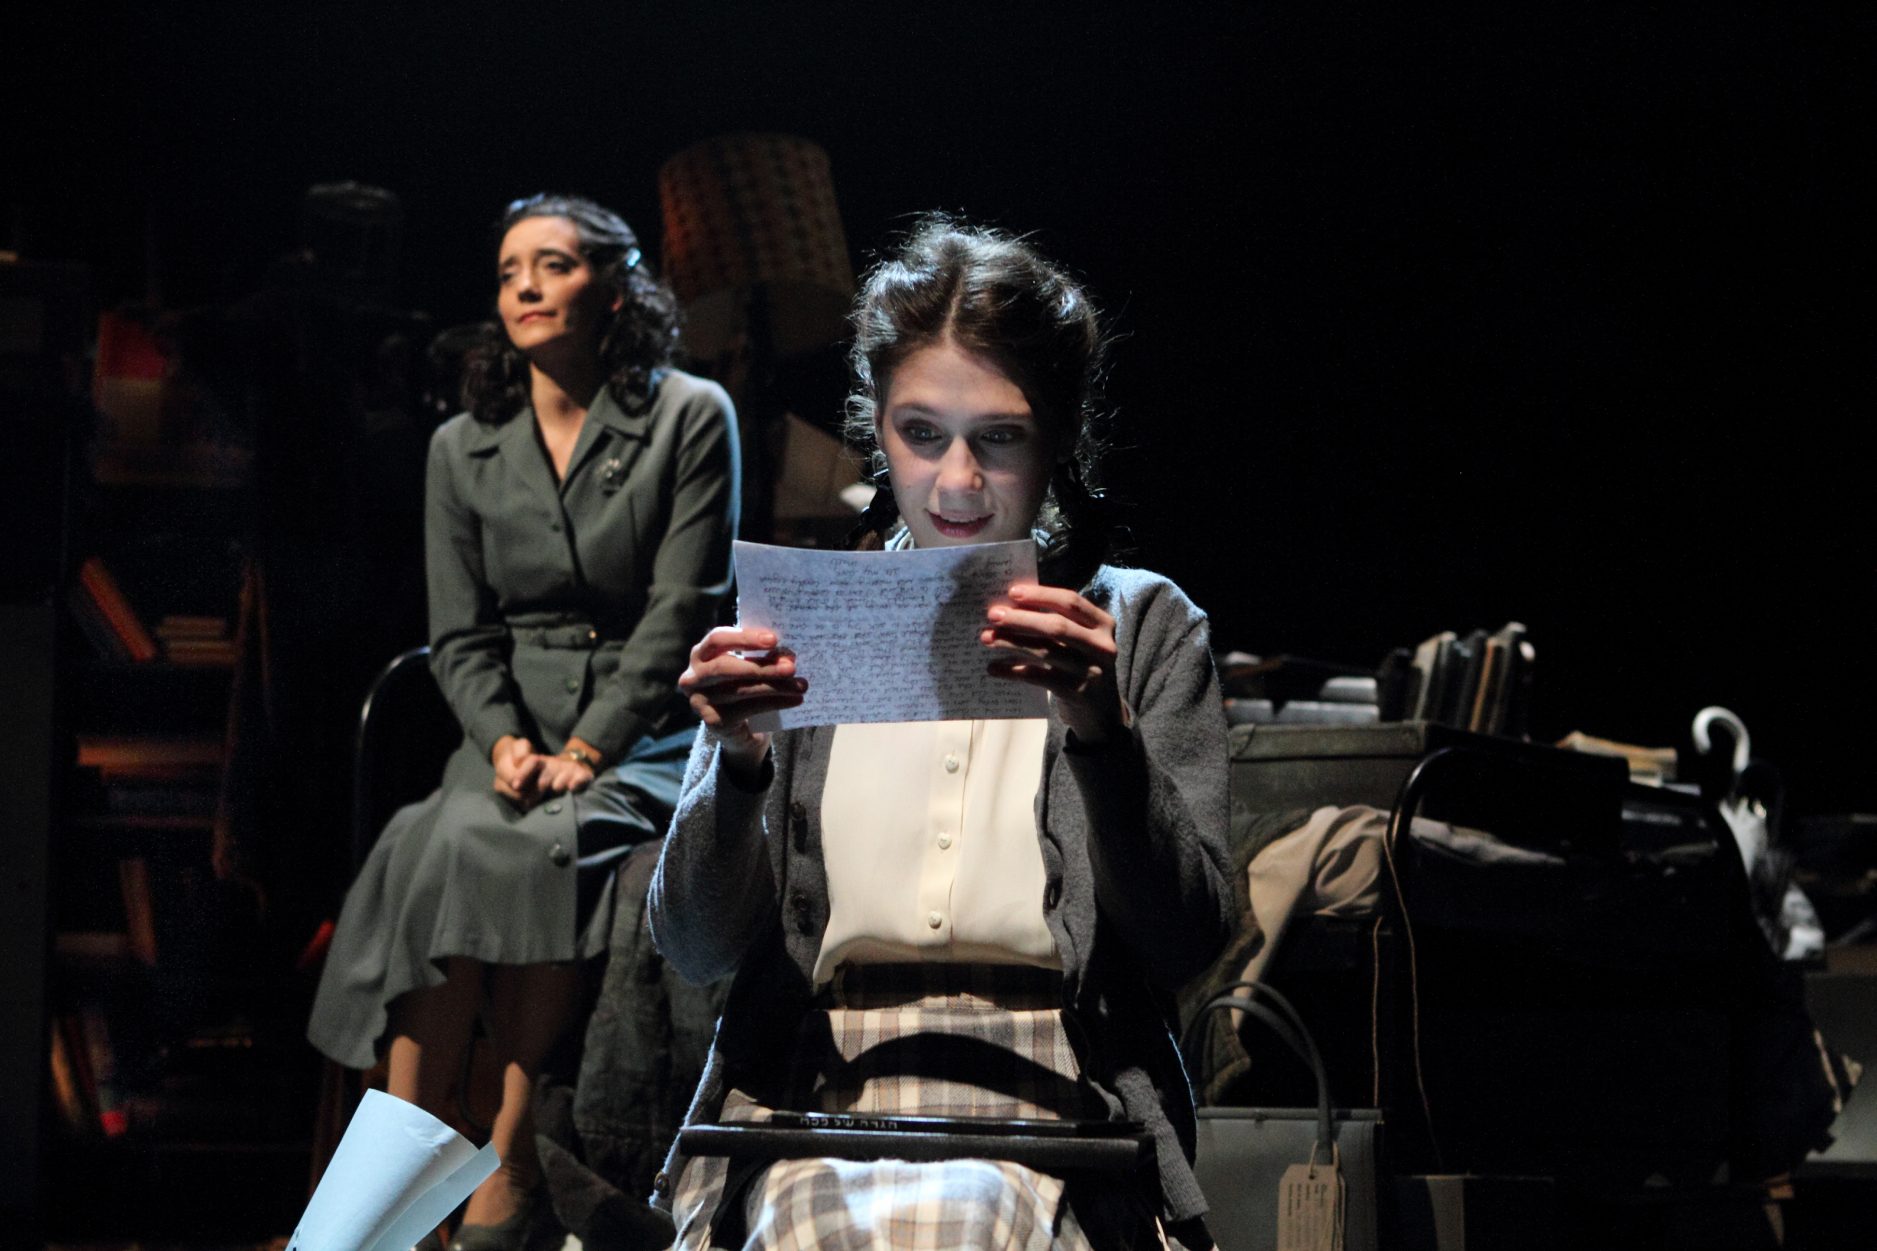 Kindertransport in Production, photography by Catherine Ashmore